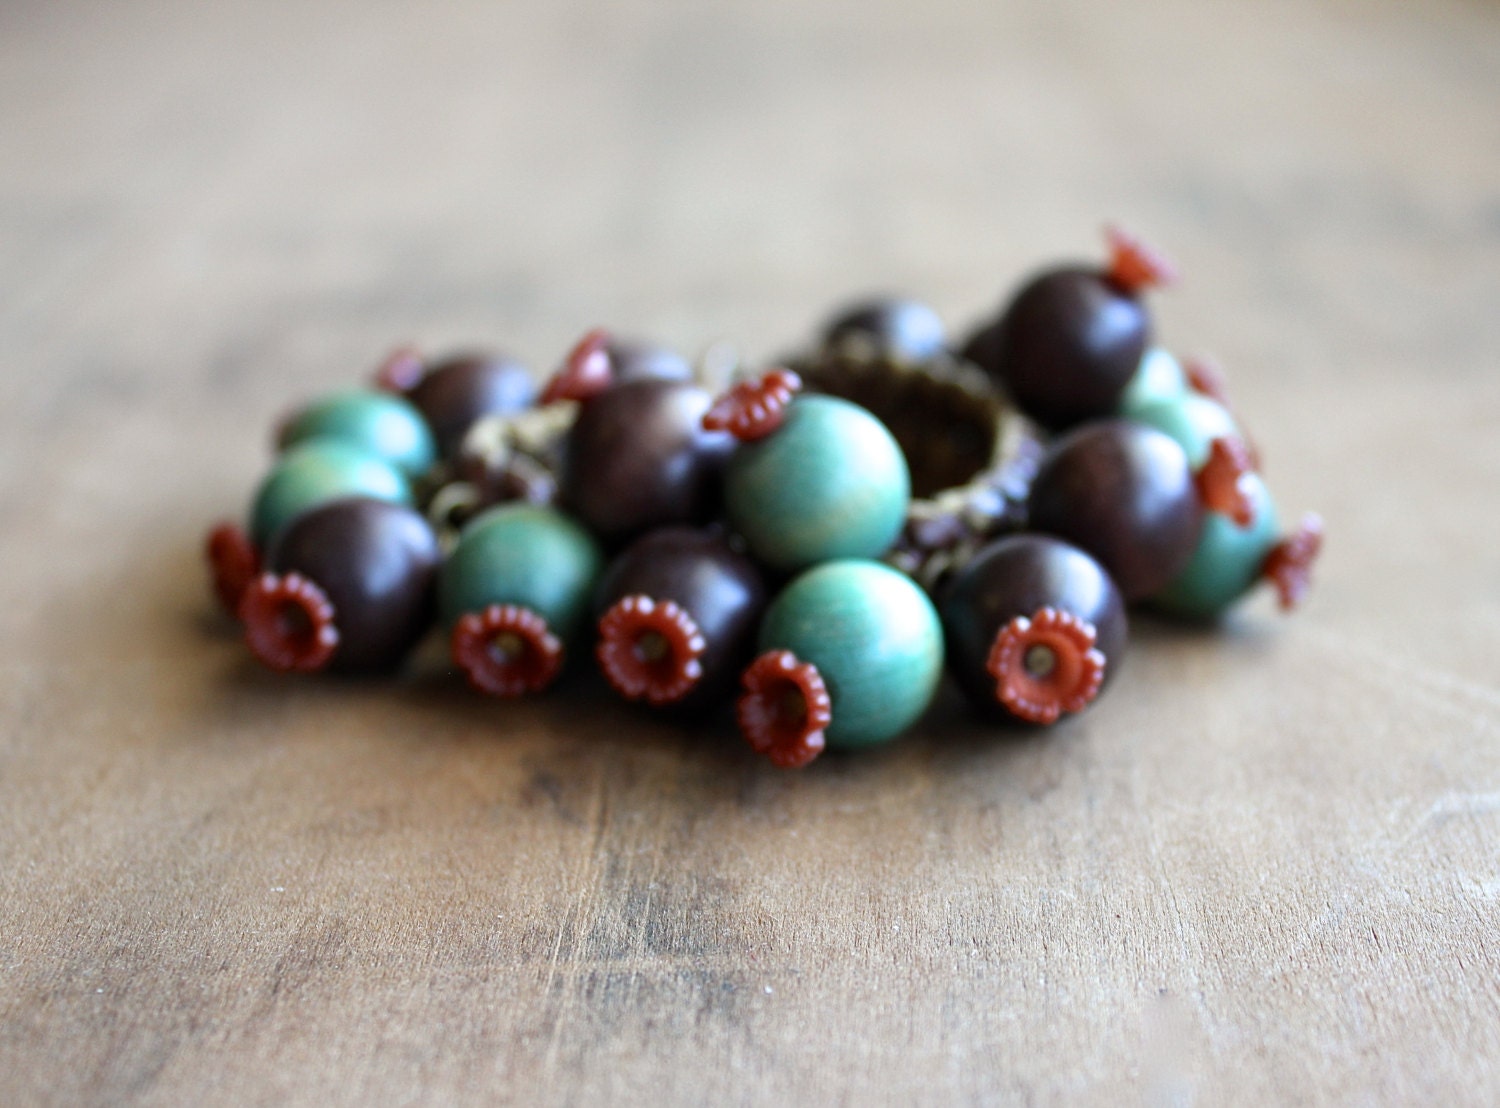 Blossoms - Vintage 1940s Bracelet - Vintage Jewelry - Leather - Flowers - Wood - Wooden - Beads - Garden - Mother's Day - becaruns